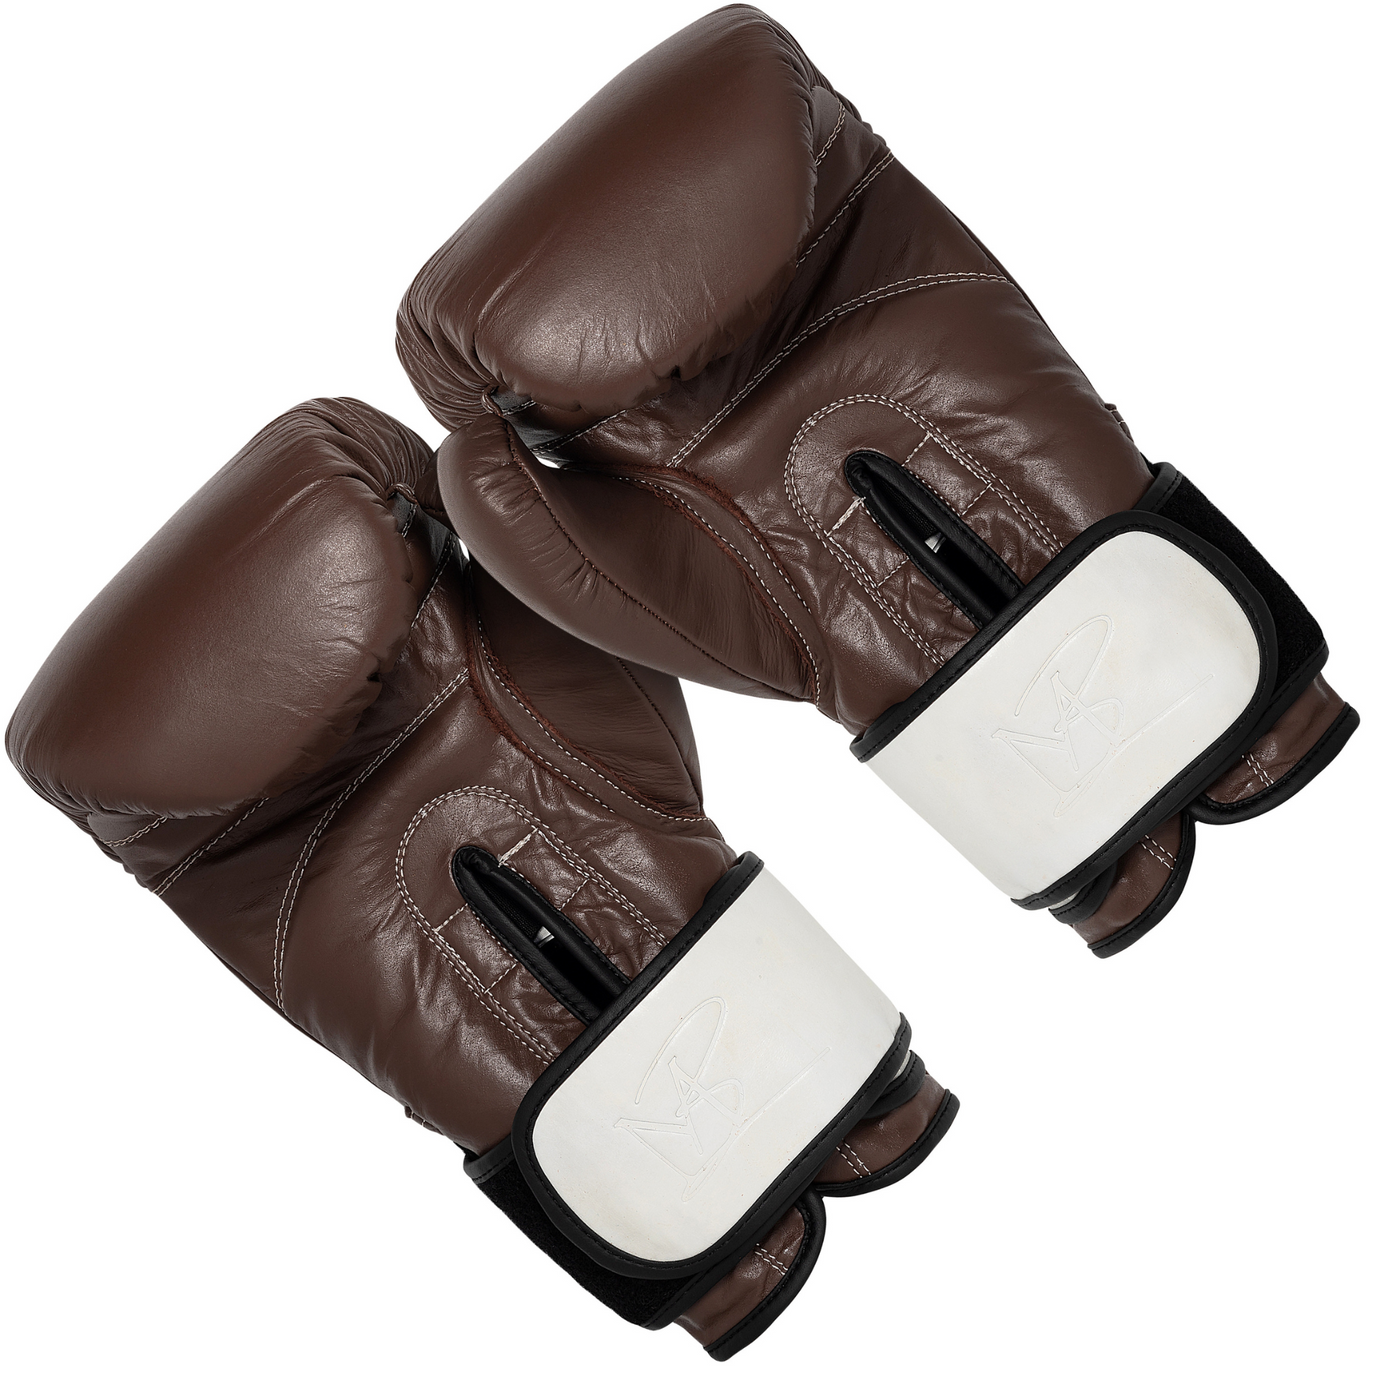 THE POP - Hook and Loop Buffalo Leather Boxing Glove - Brown